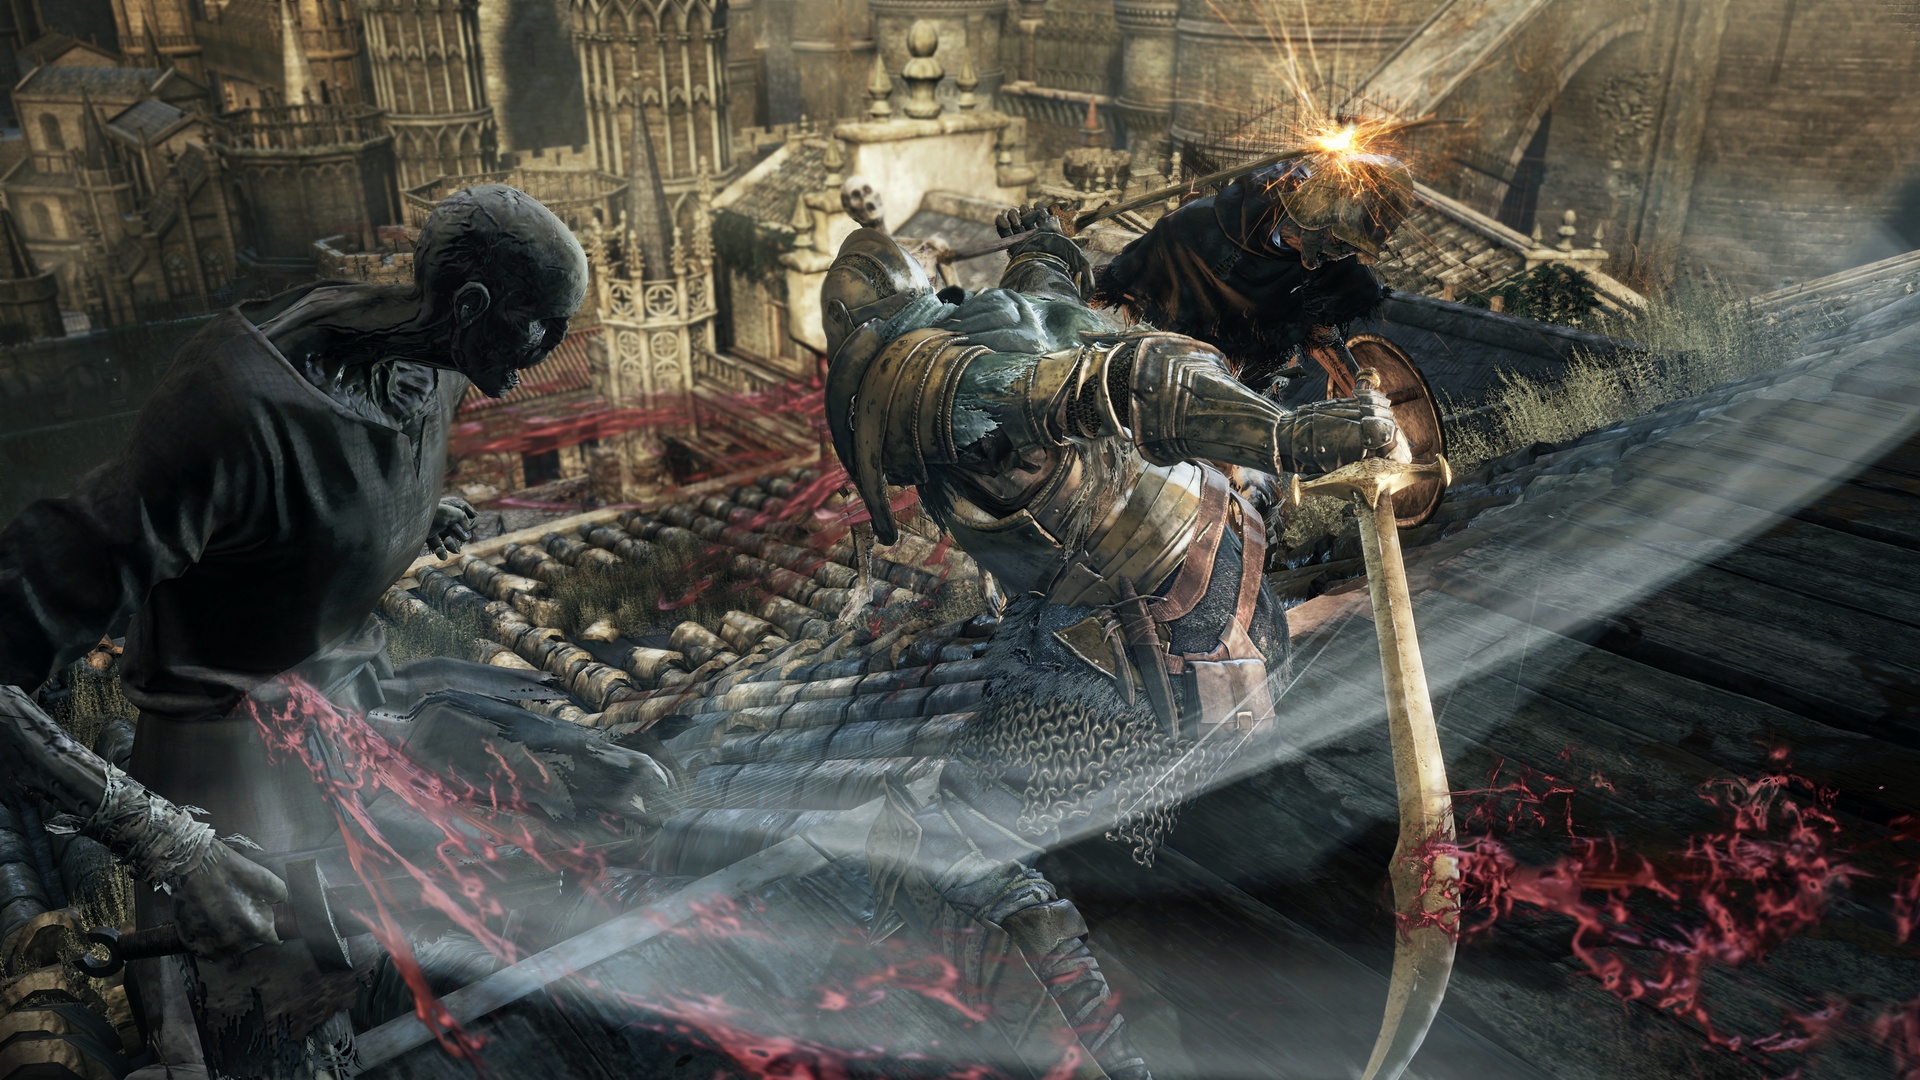 Dark souls becomes a little bit easier with the right gear